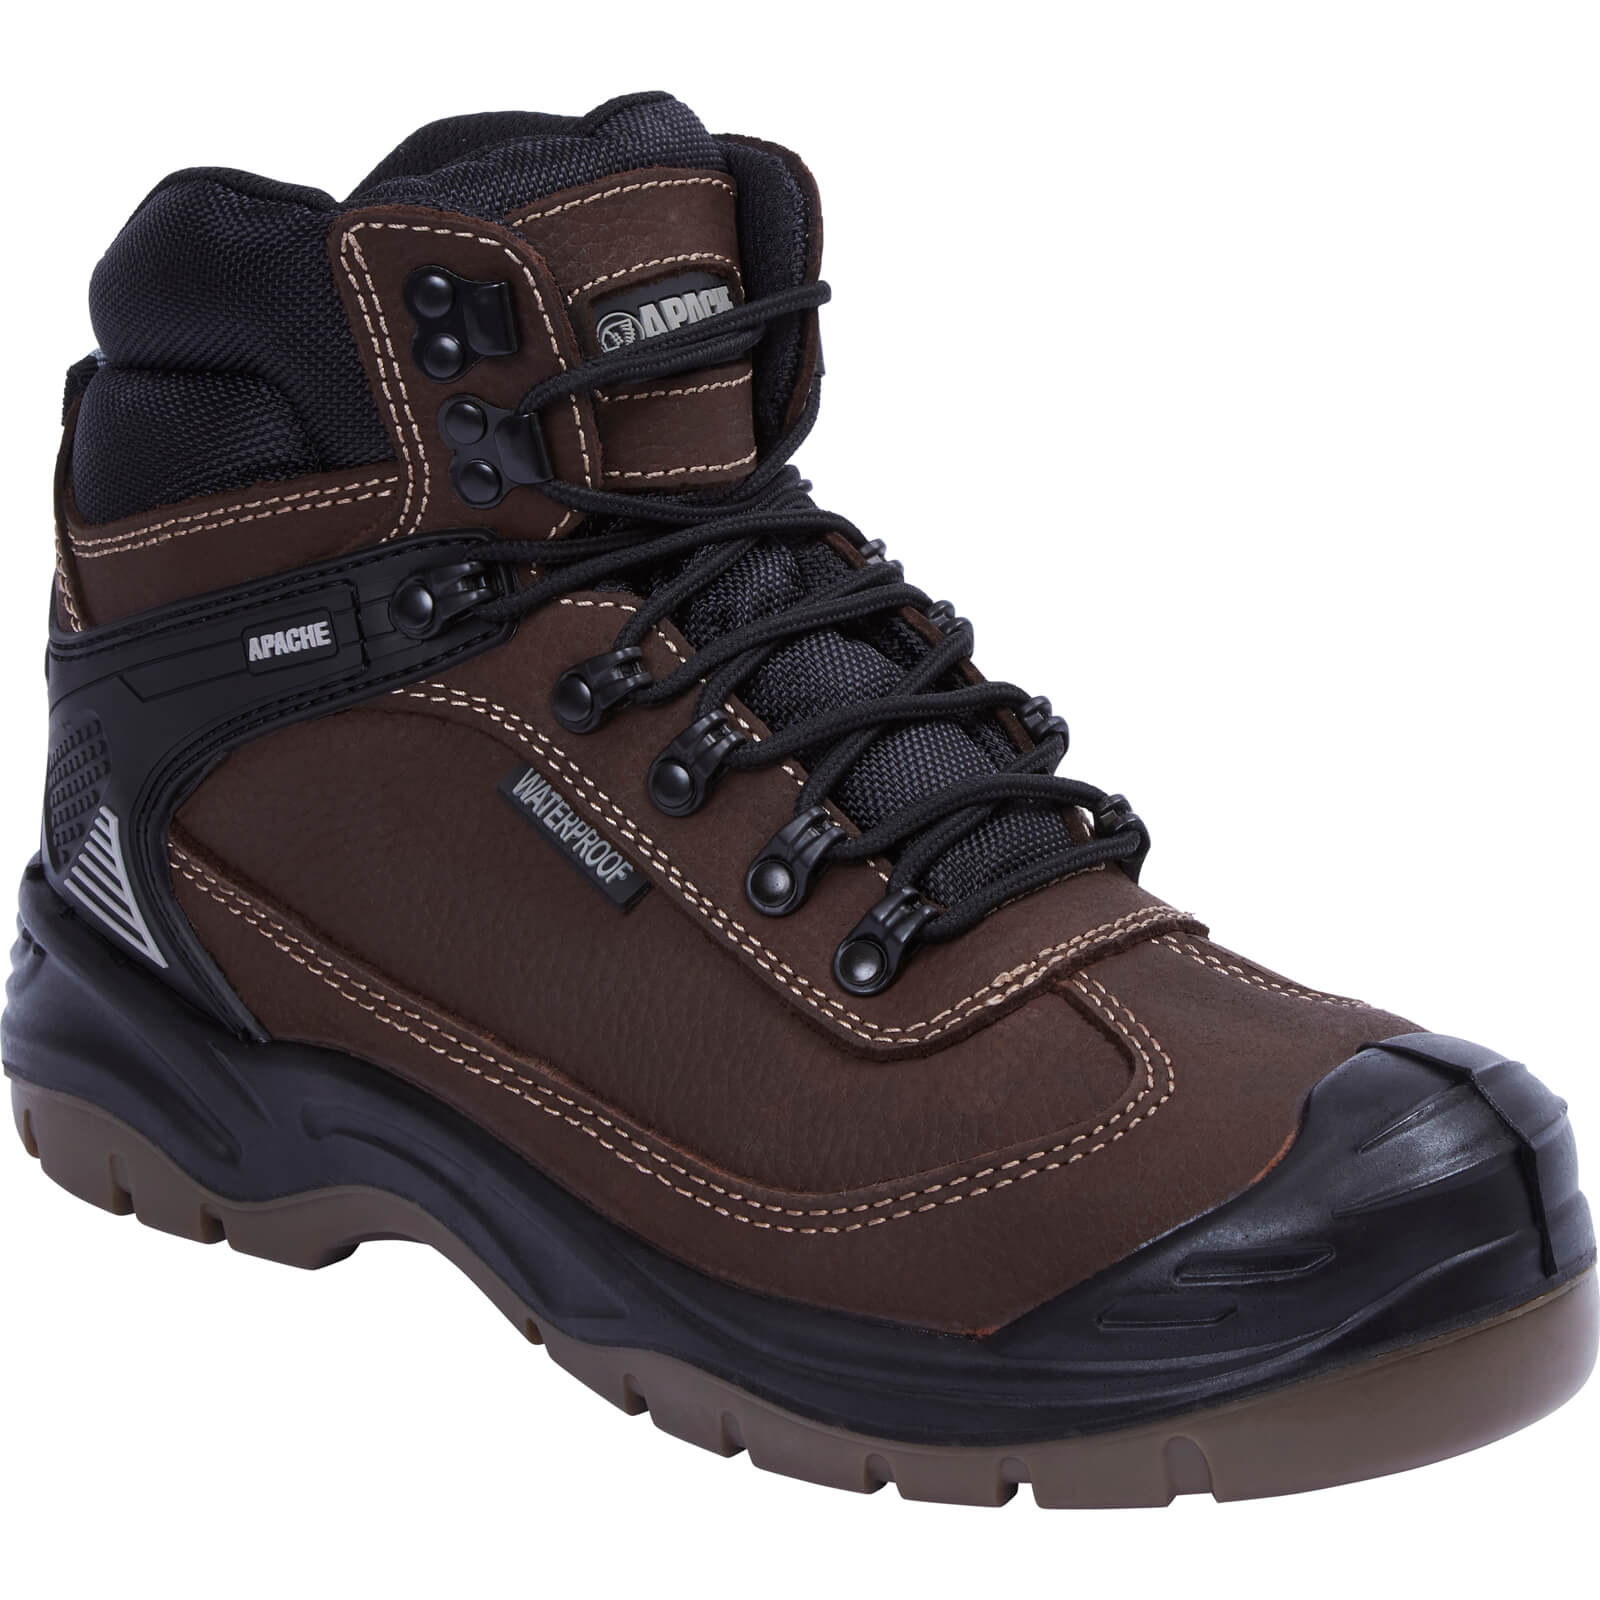 Apache RANGER Waterproof Safety Hiker Boots Brown Size 13